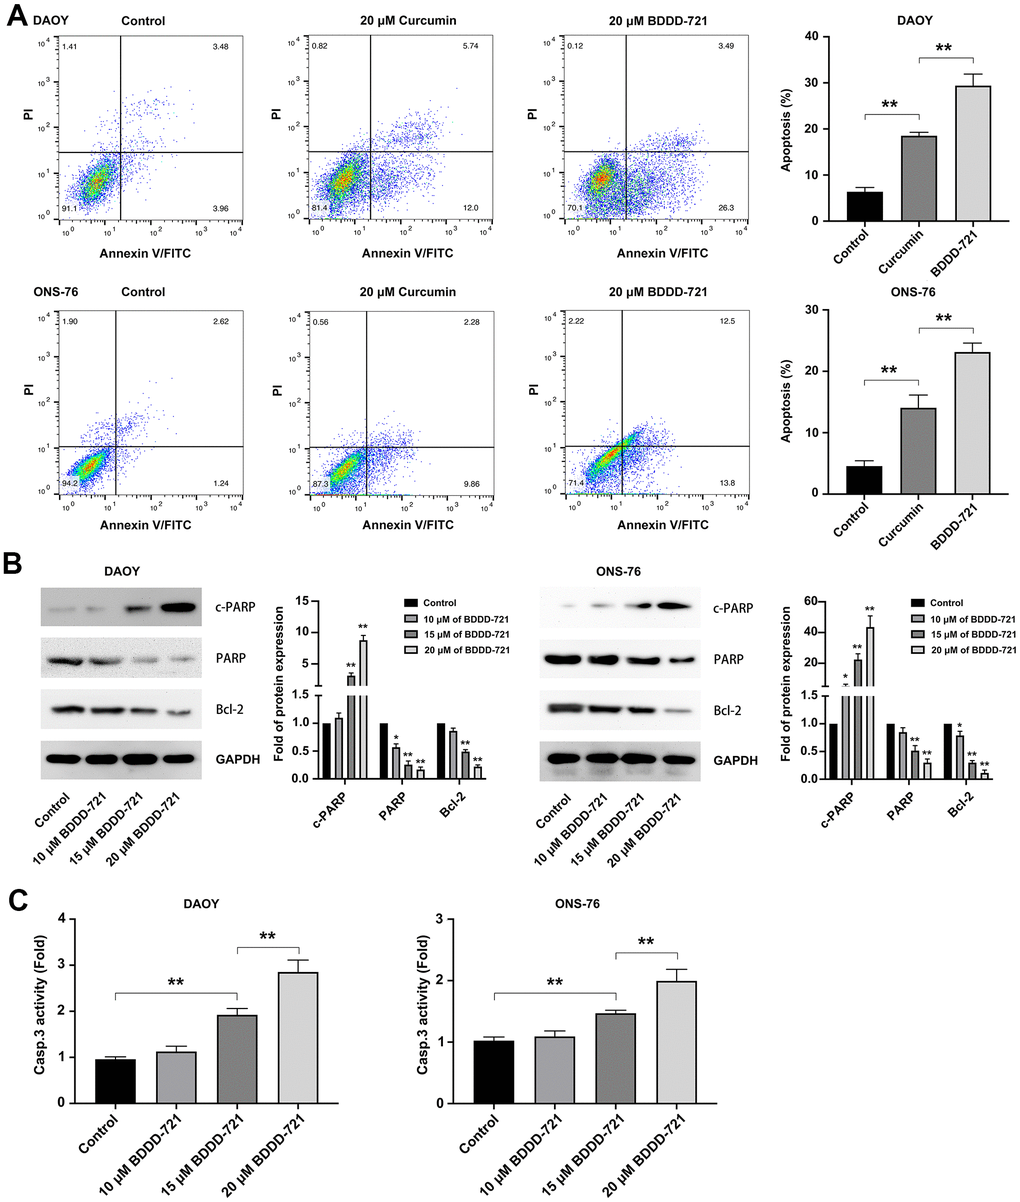 BDDD-72 and curcumin triggered apoptosis against medulloblastoma cells. (A) Cell apoptosis was examined by flow cytometry assay using the Annexin V/PI after BDDD-721 or curcumin treatment for 24h. (B) Apoptosis-related proteins of cleaved PARP, PARP and Bcl-2 were analyzed by western blot. (C) Caspase-3 activity was measured by ELISA assay. Compared with Control, *p p 